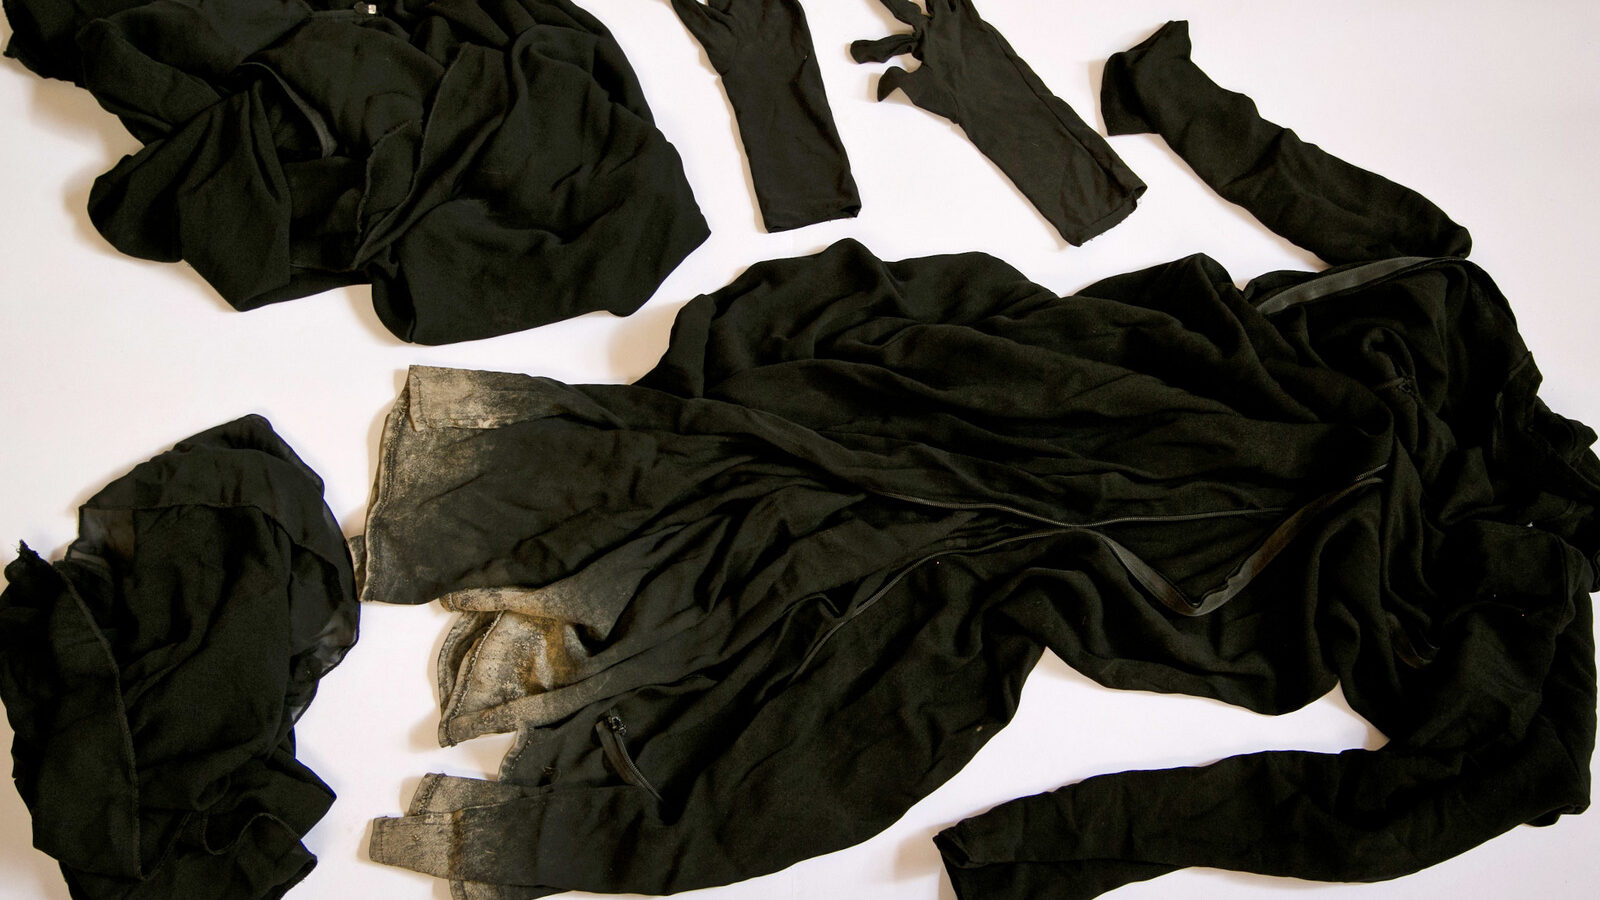 Clothing worn by a Yazidi girl enslaved by ISIS militants, collected by a Yazidi activist to document Islamic State group crimes against the community, shown in this file photo taken May 22, 2016, in Dohuk, northern Iraq.